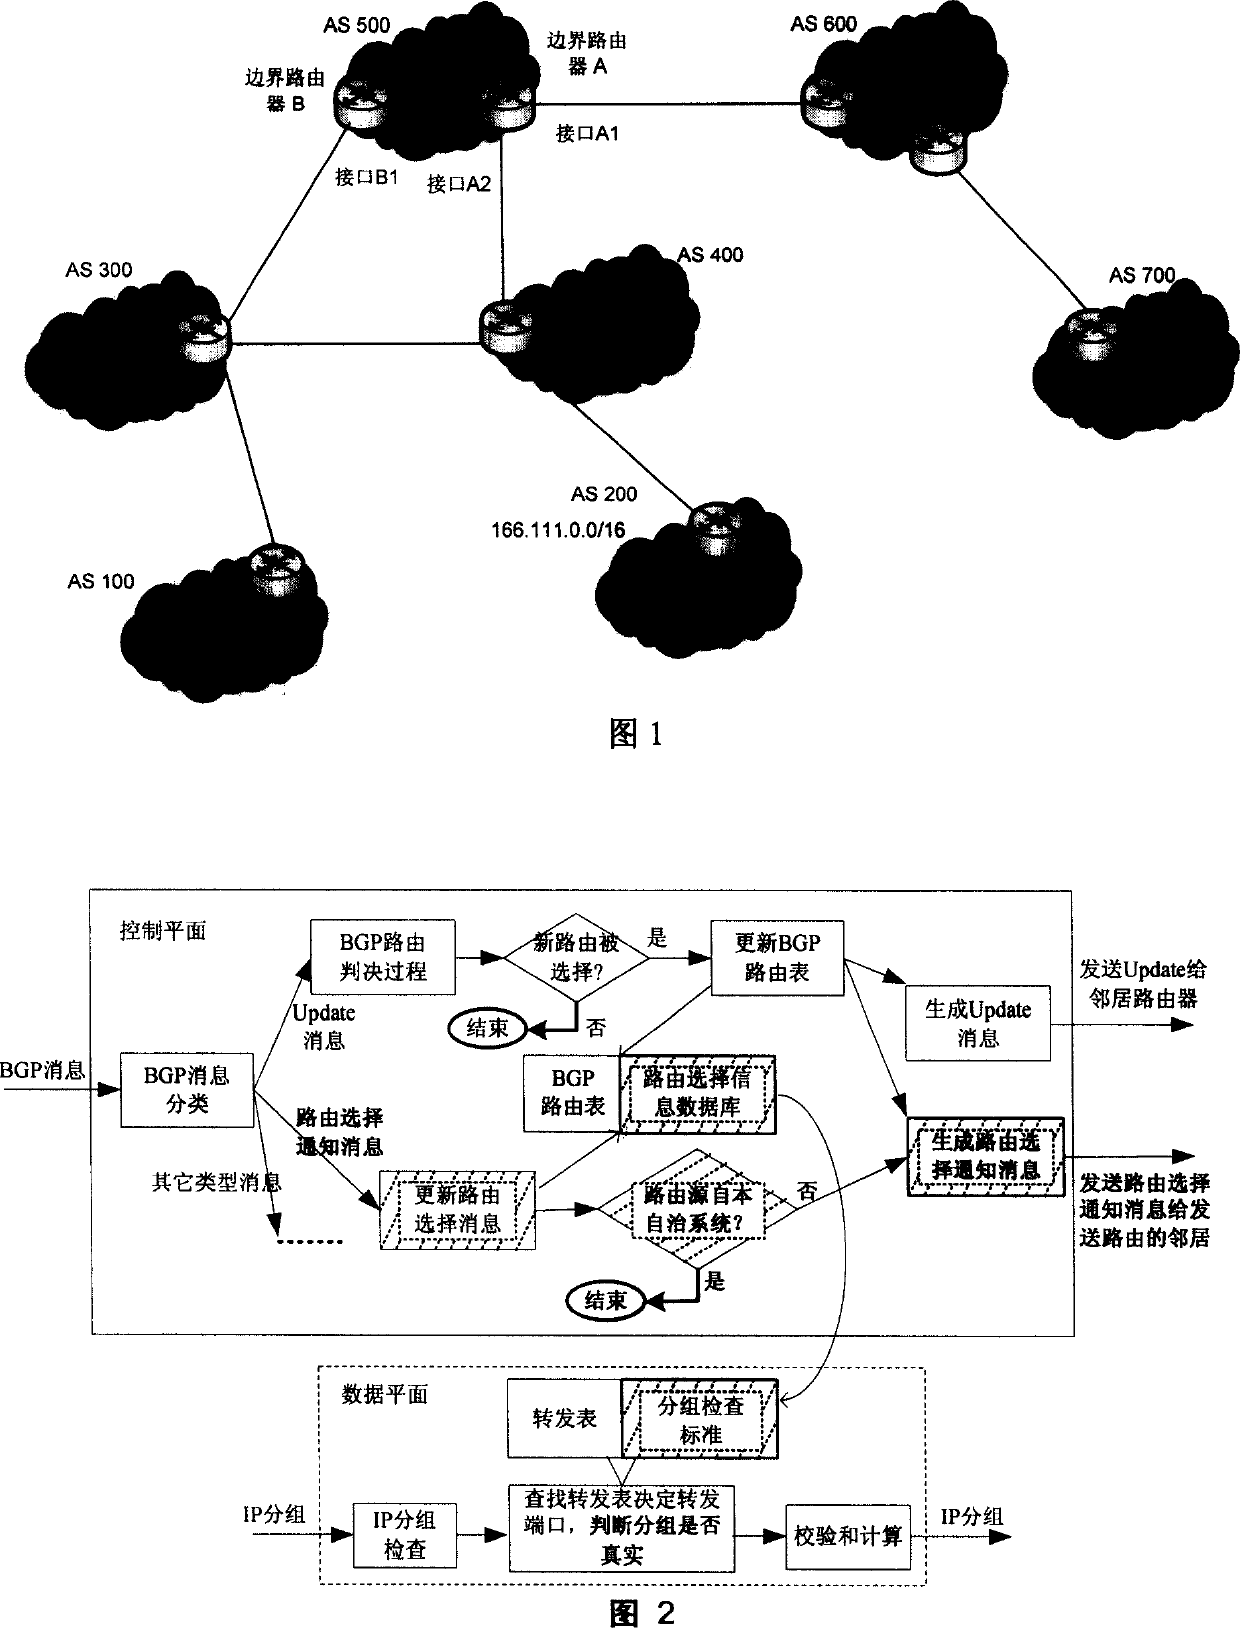 Method for setting up notification function for route selection according to border gateway protocol